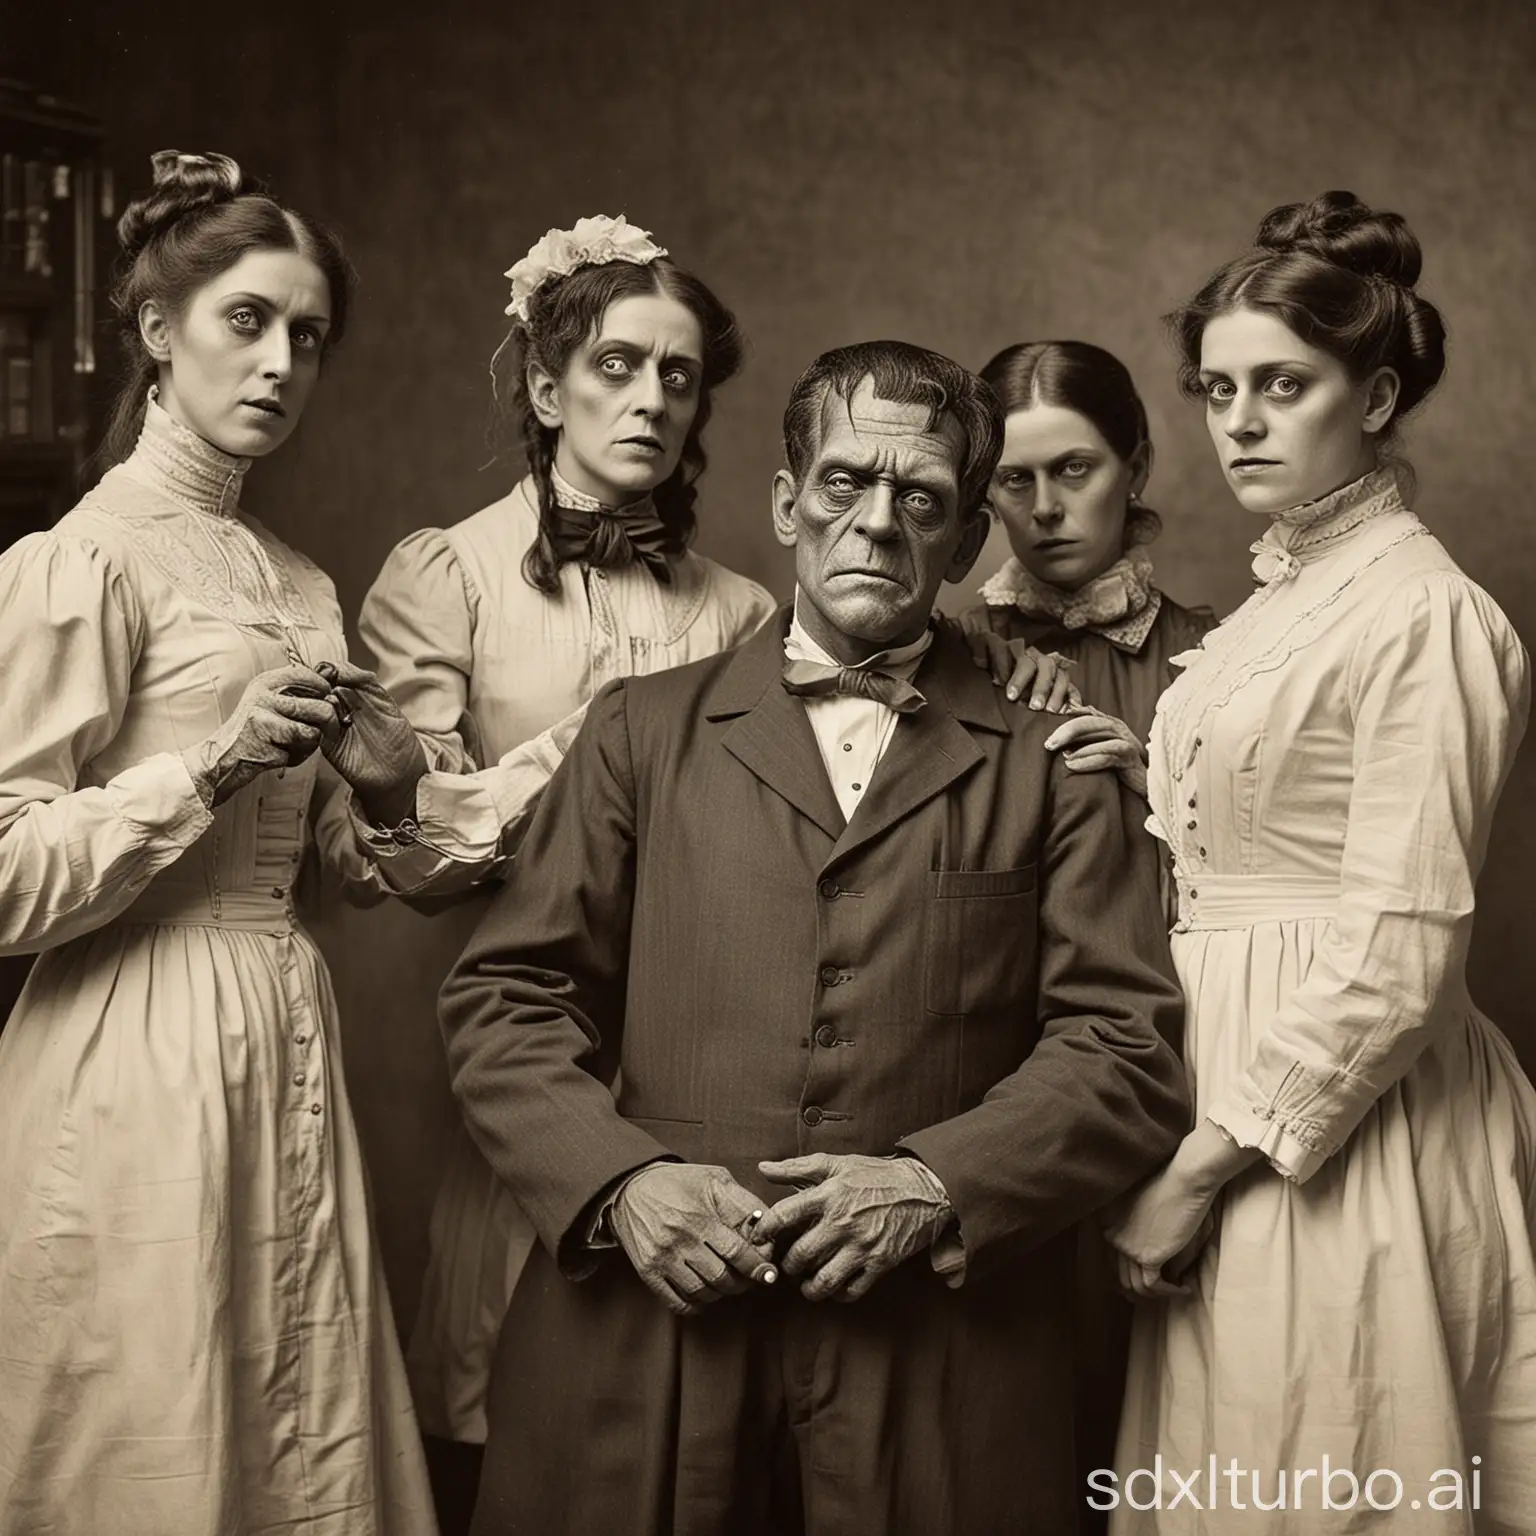 Victorian-People-Transformed-into-Frankenstein-Monsters-by-Mad-Scientist